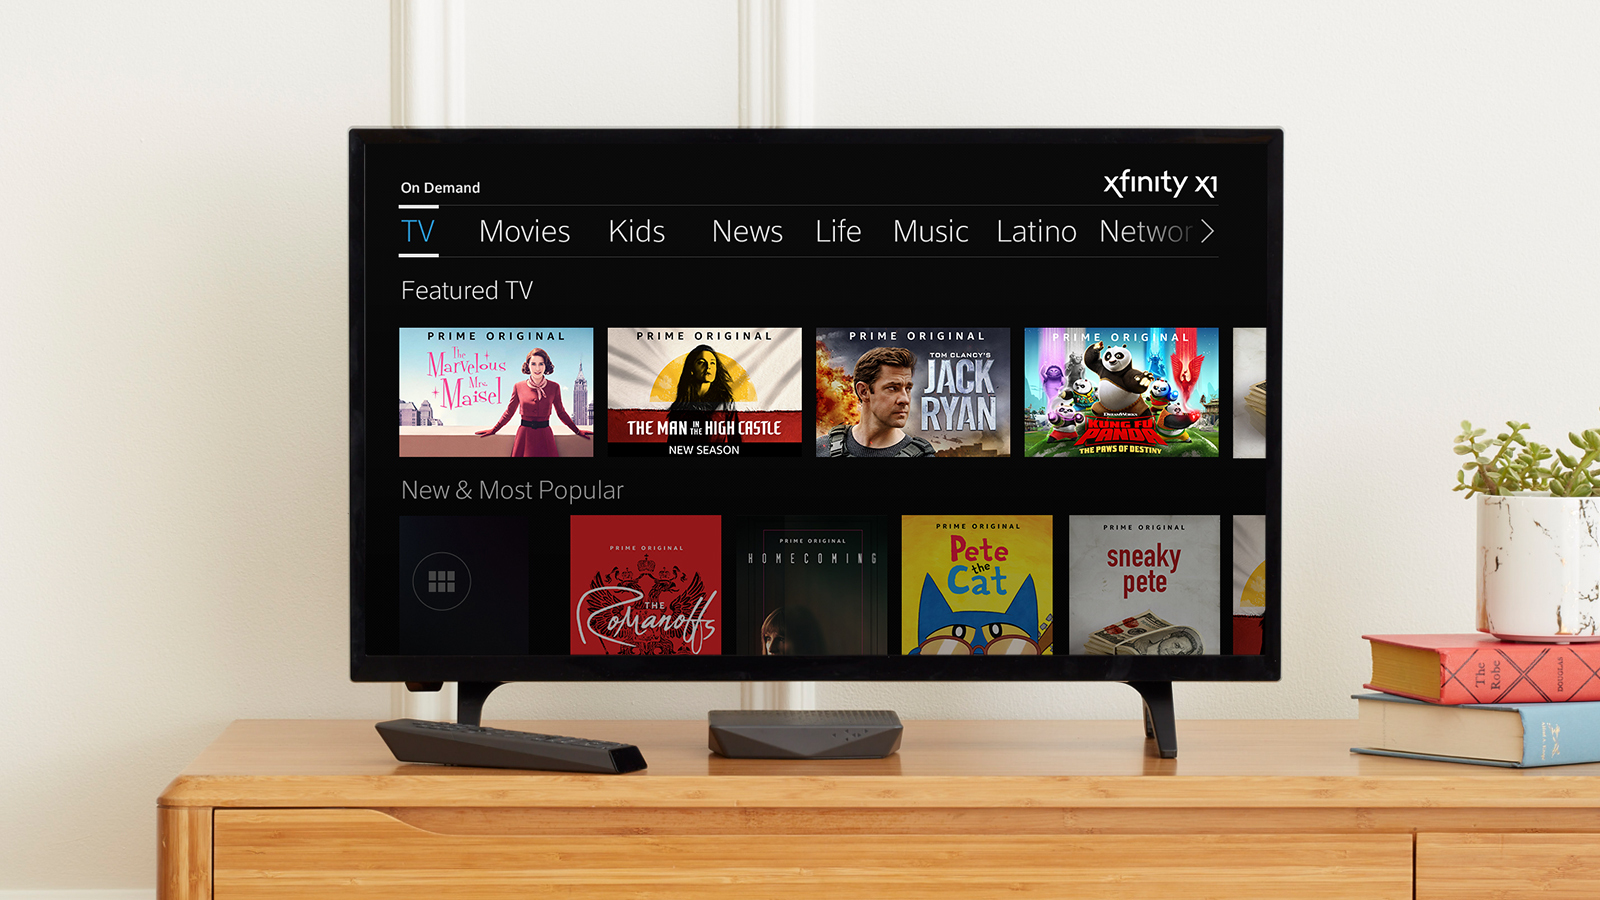 Comcast to Launch Amazon Prime Video on Xfinity X1 Nationwide Business Wire